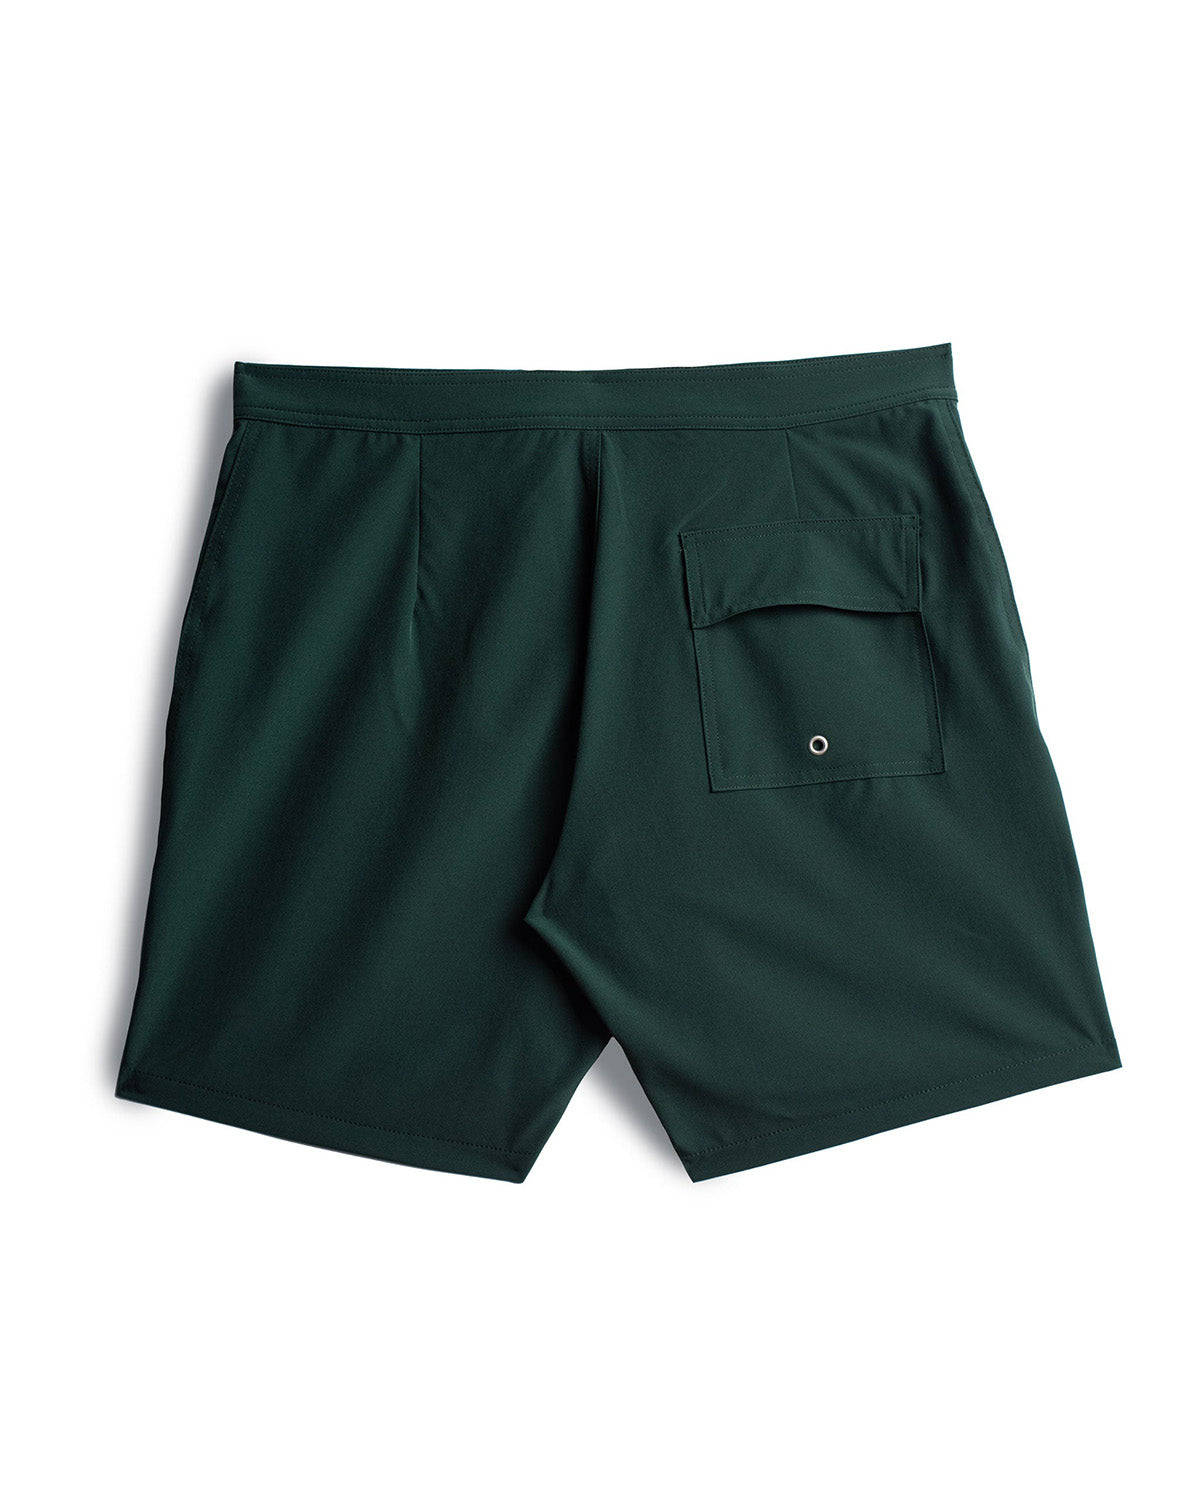 pine green Bather technical surf trunk back view